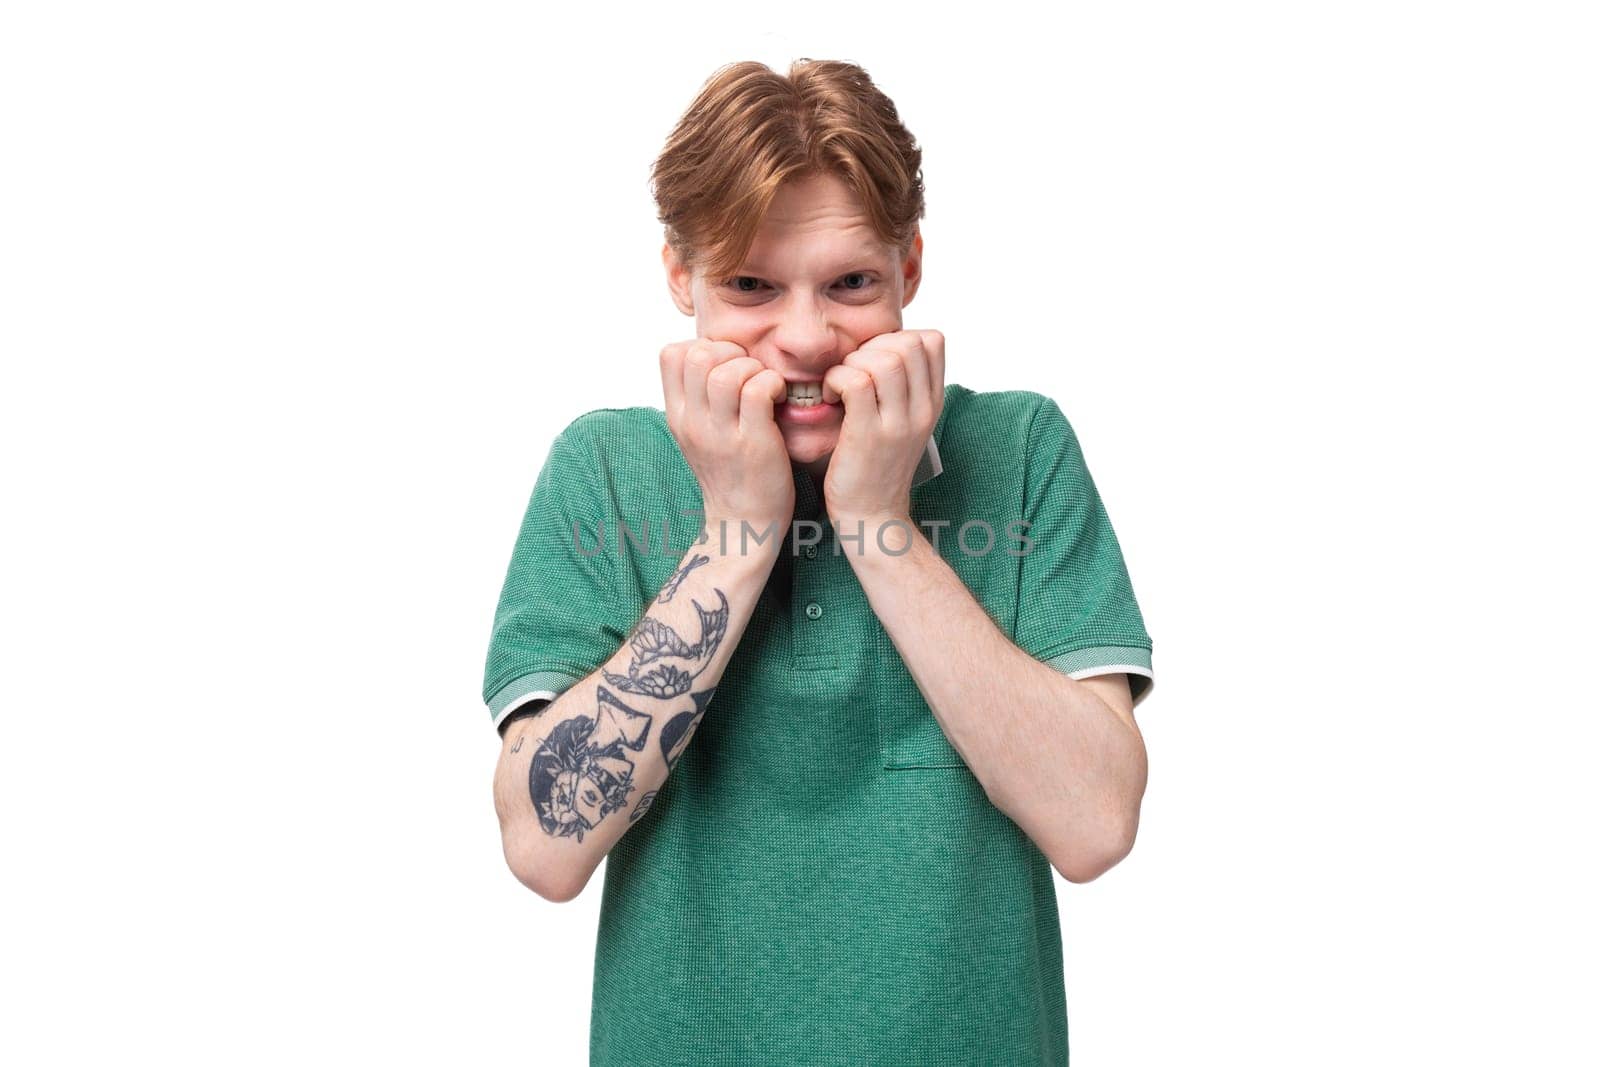 young stylish european guy with red hair with a tattoo on his forearm wears a green t-shirt has doubts by TRMK